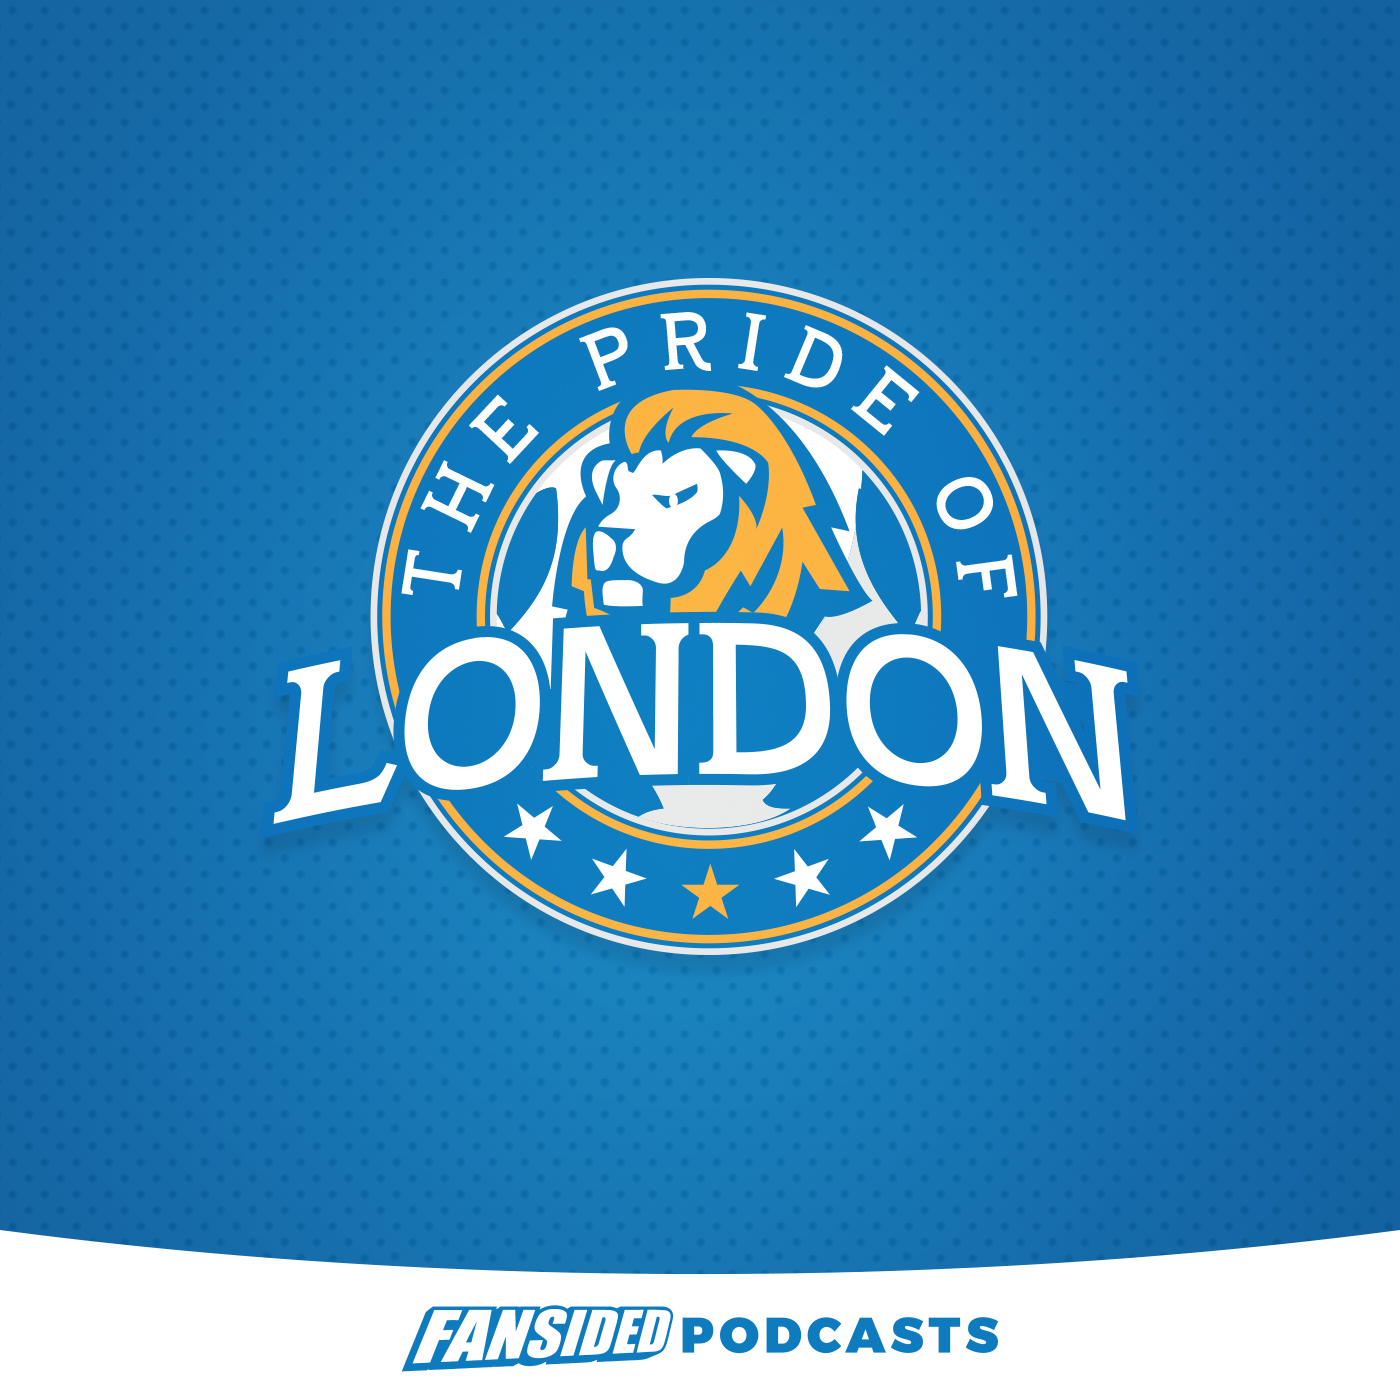 The Pride of London Podcast